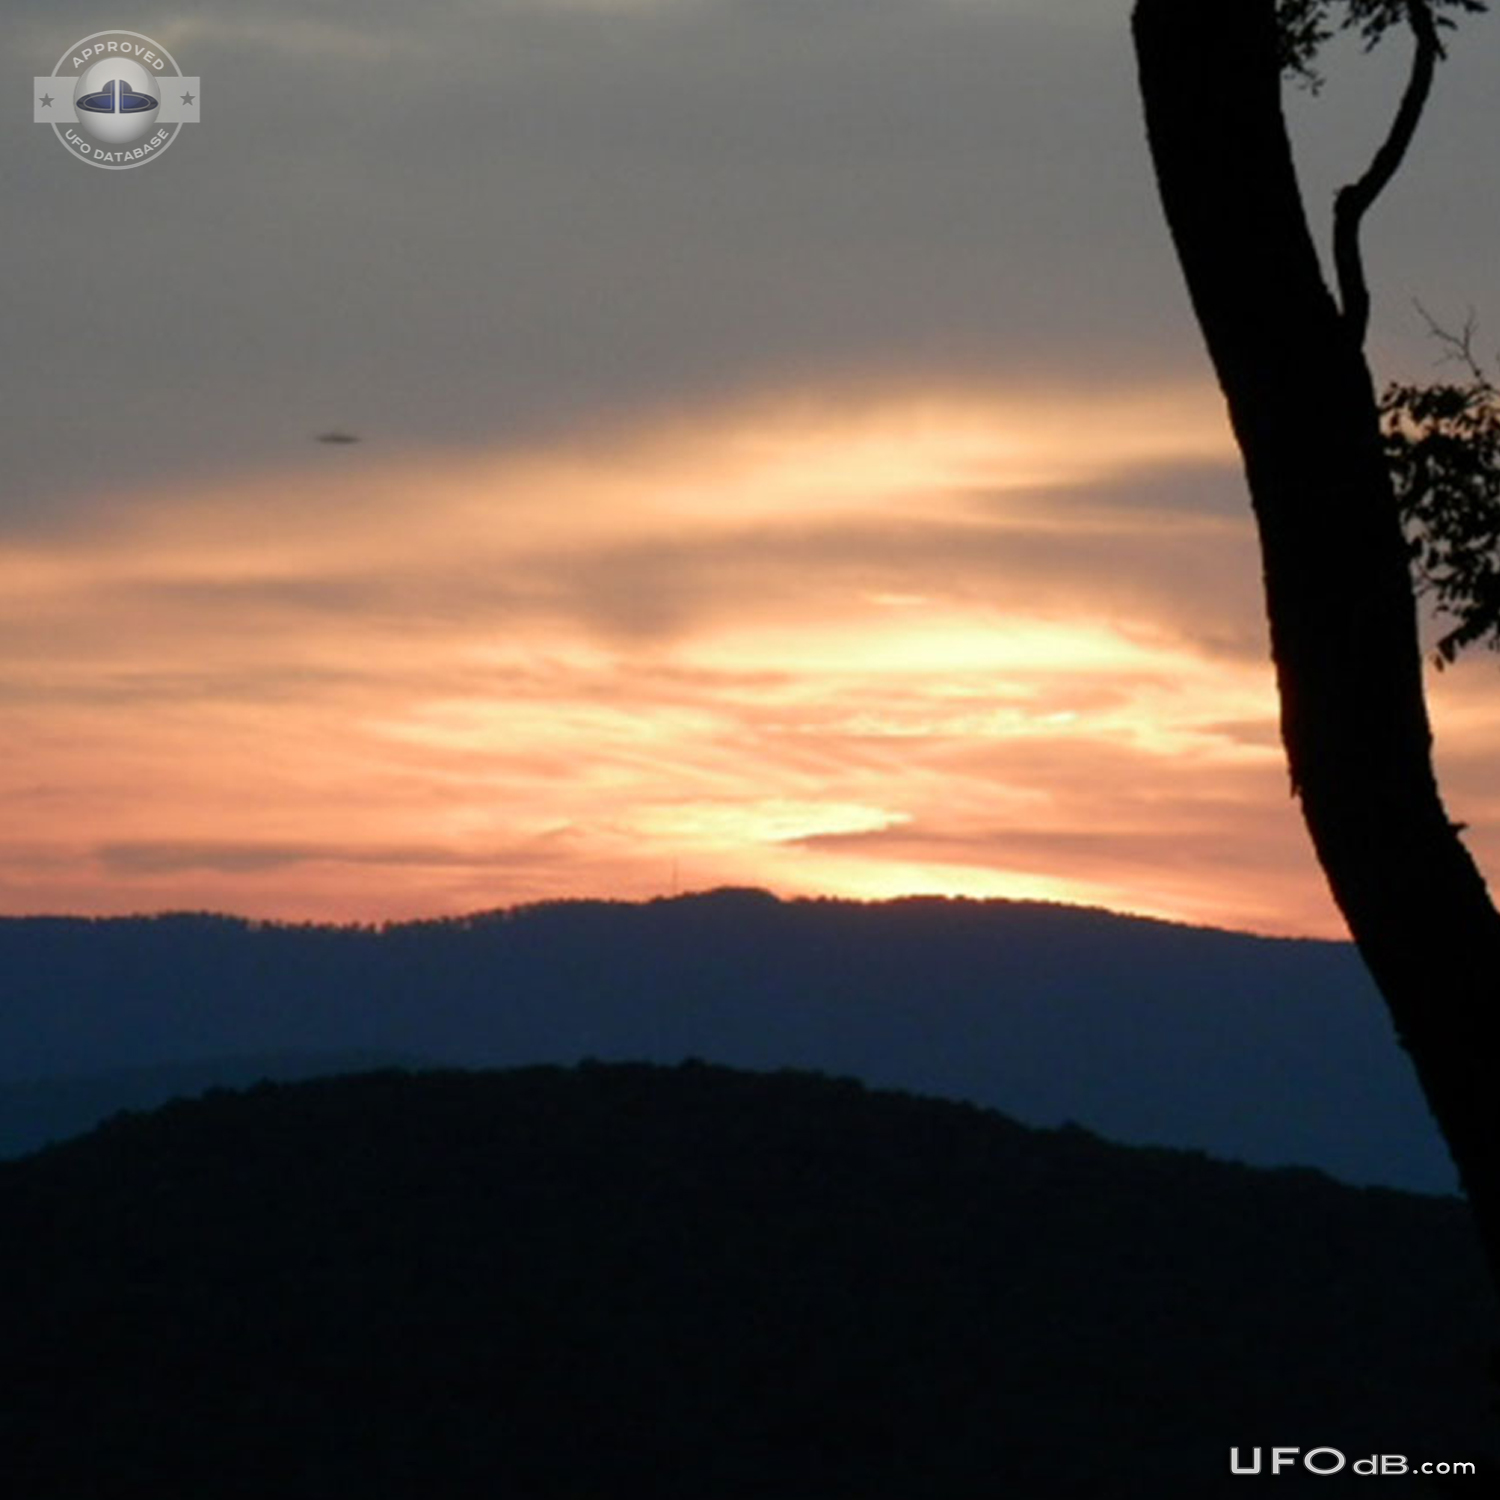 UFO saucer caught on picture - Lost River, West Virginia USA 2013 UFO Picture #616-2